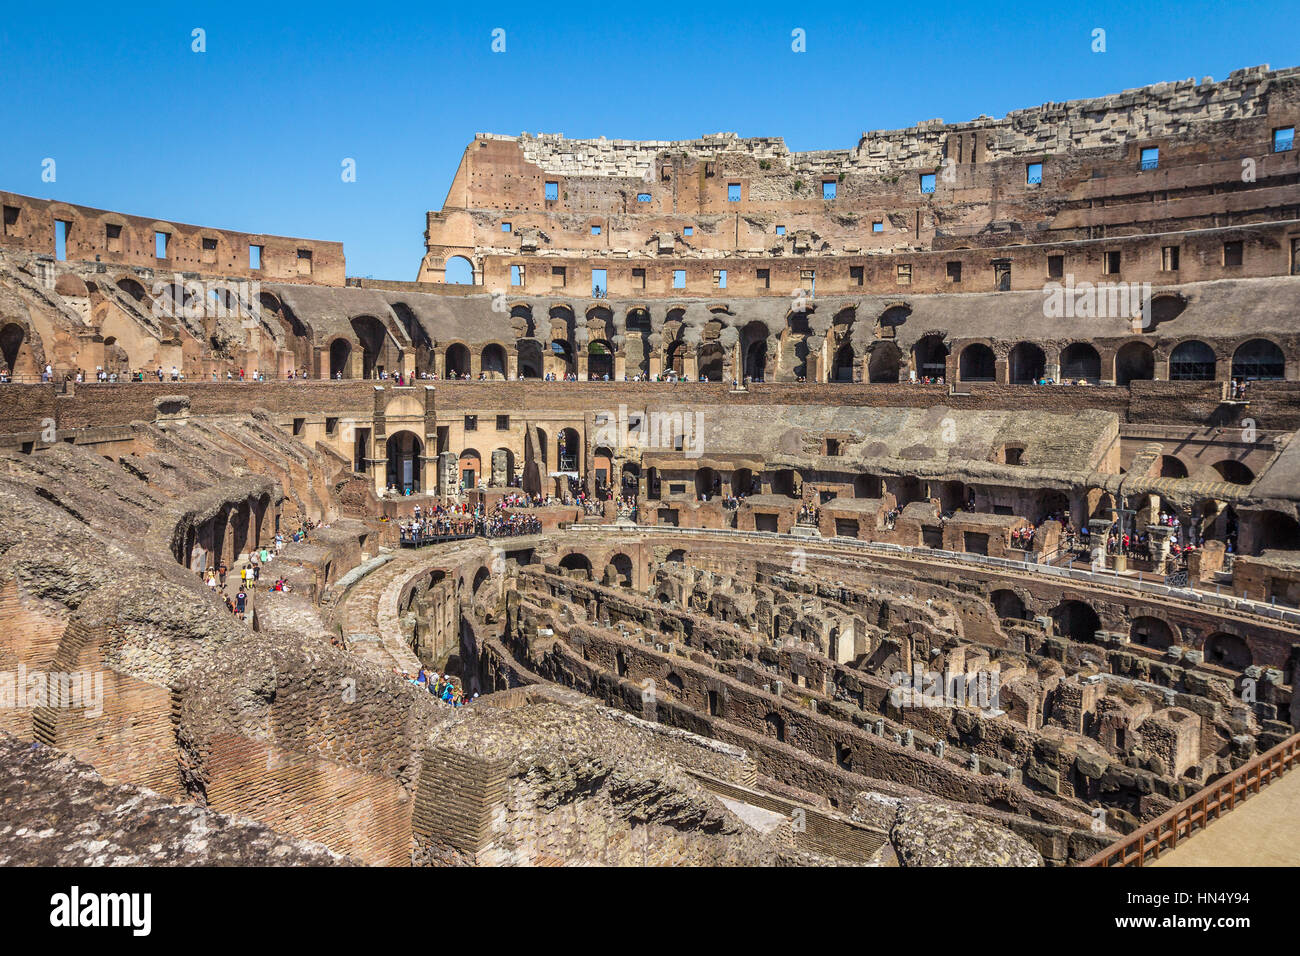 Inside the coloseum Stock Photo